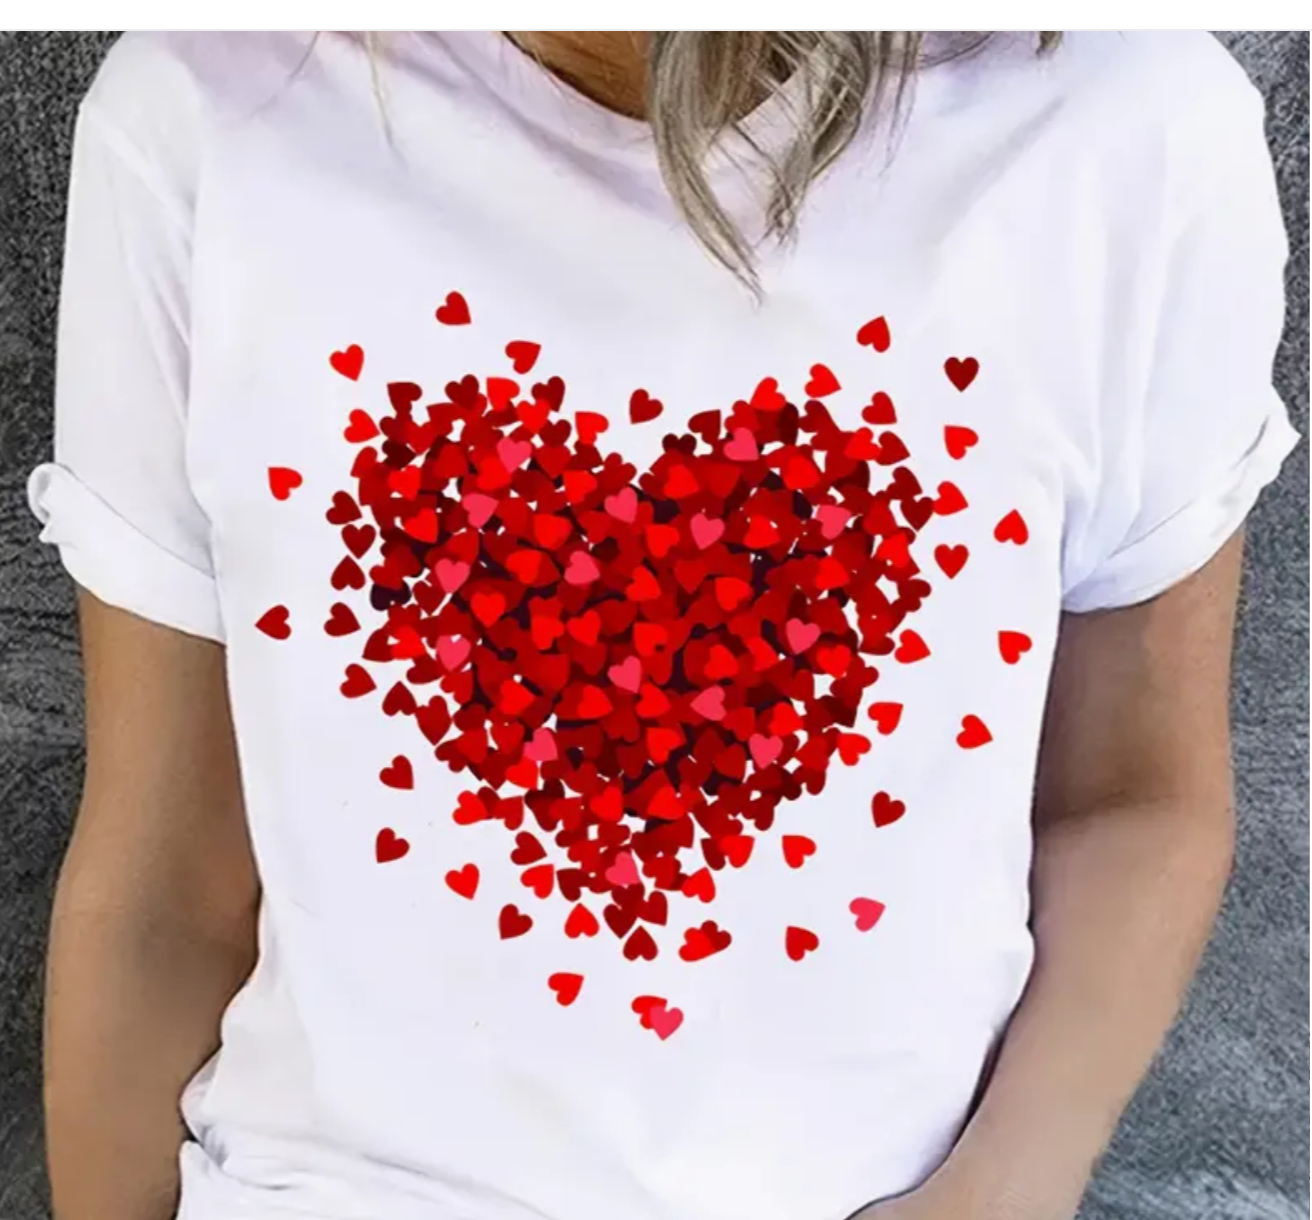 Love in Print: Heartful T-Shirt for Valentine's Day Gifting - Casual Chic for Everyday Tops in Women's Clothing